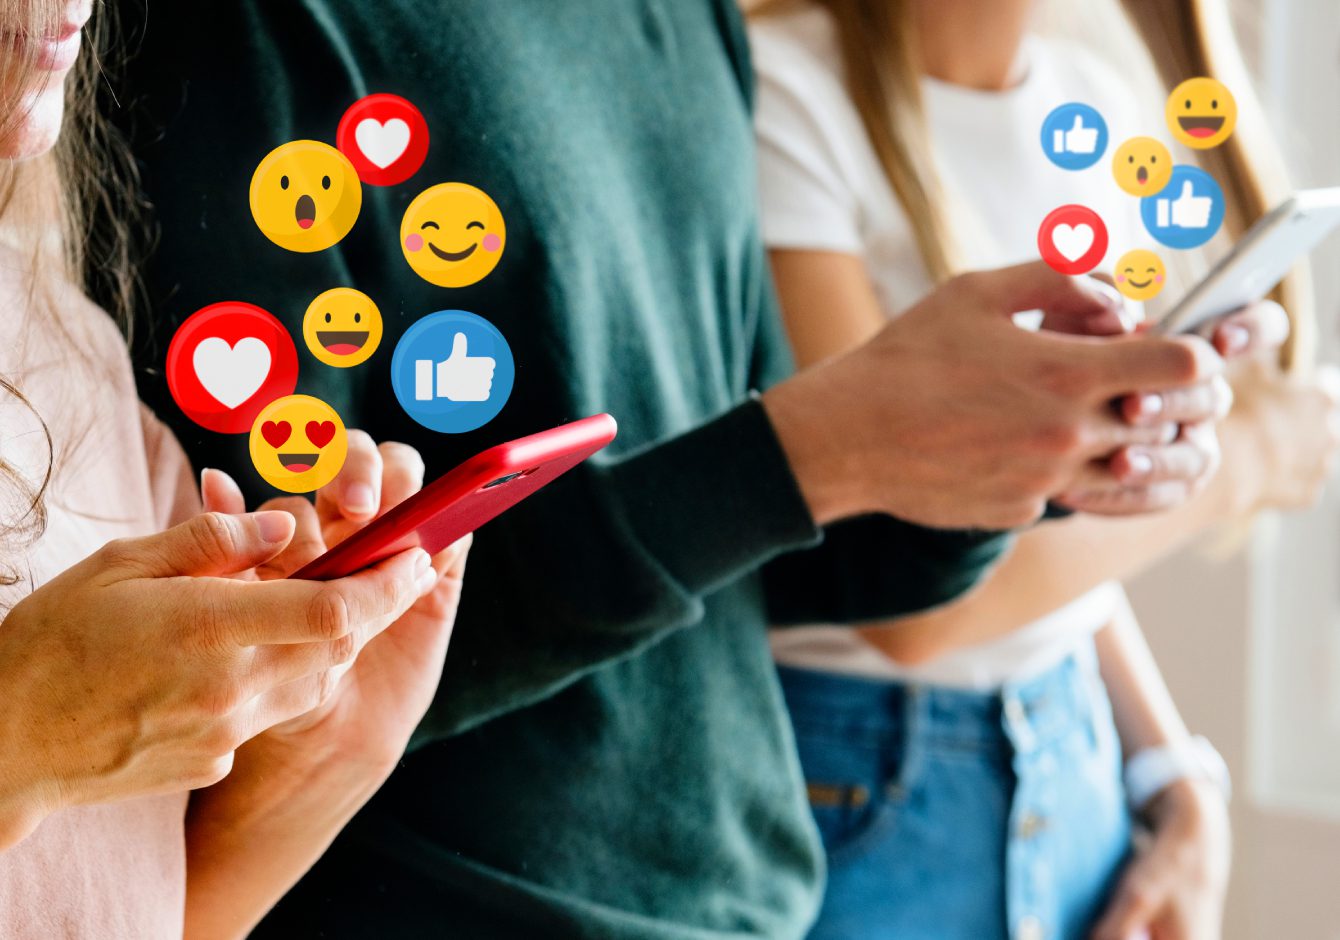 People holding smartphones with social media emoji reactions coming out of screen